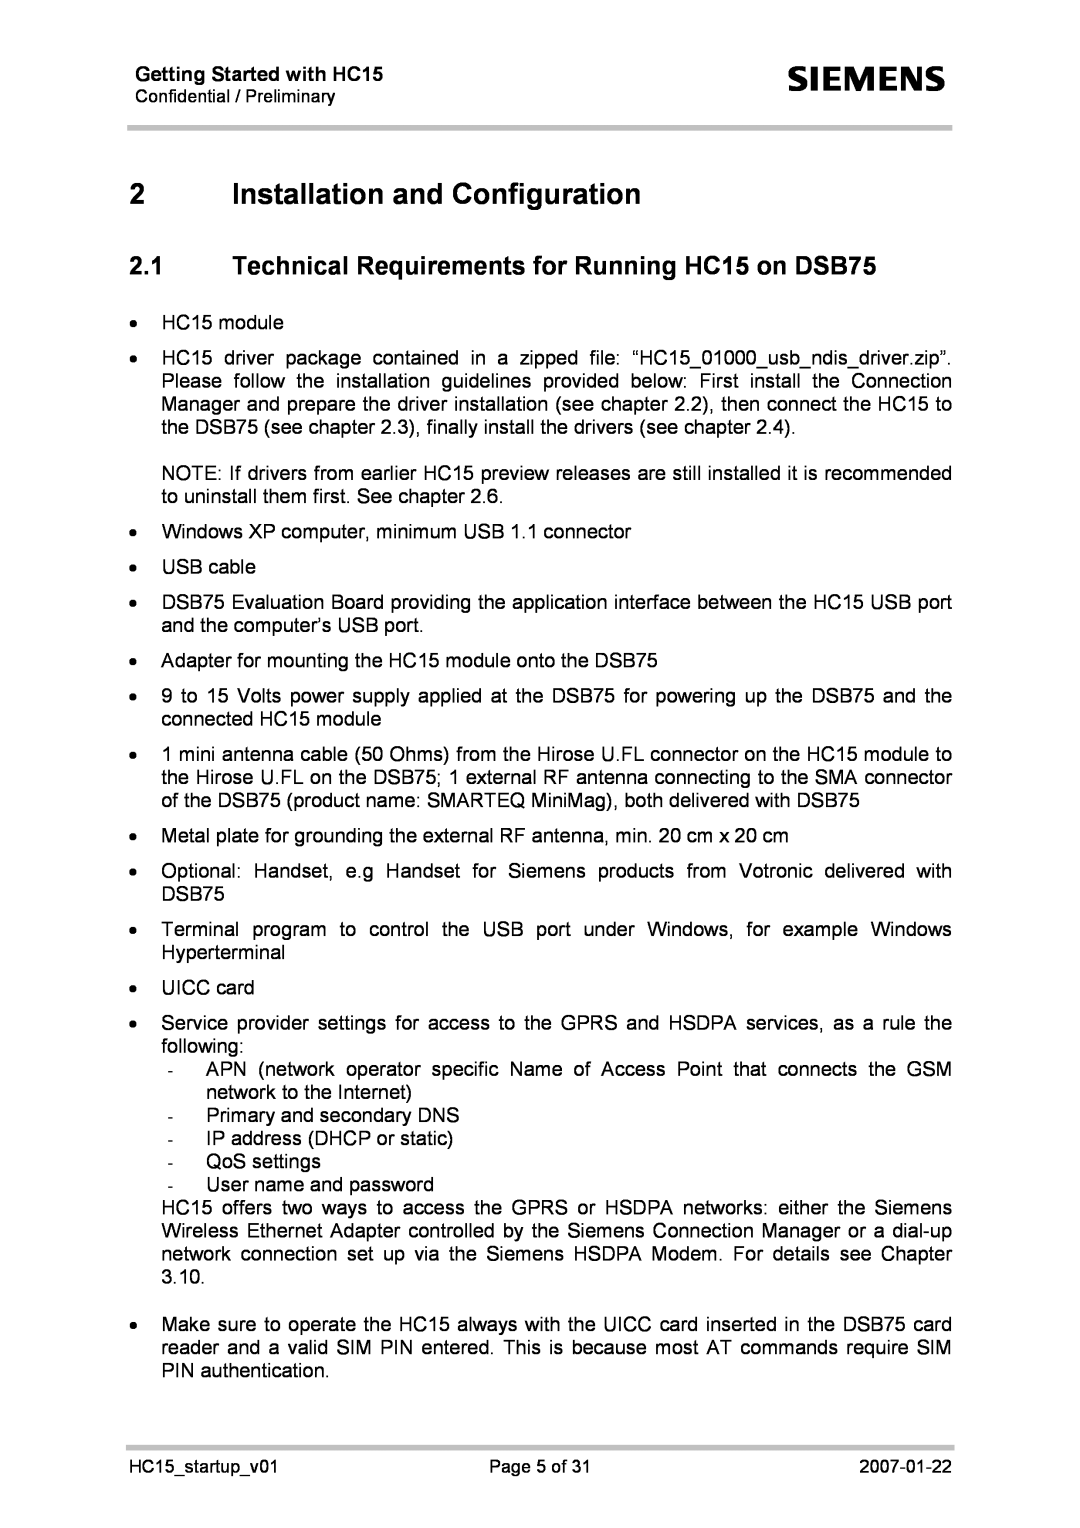 Siemens Installation and Configuration, Technical Requirements for Running HC15 on DSB75, Getting Started with HC15 